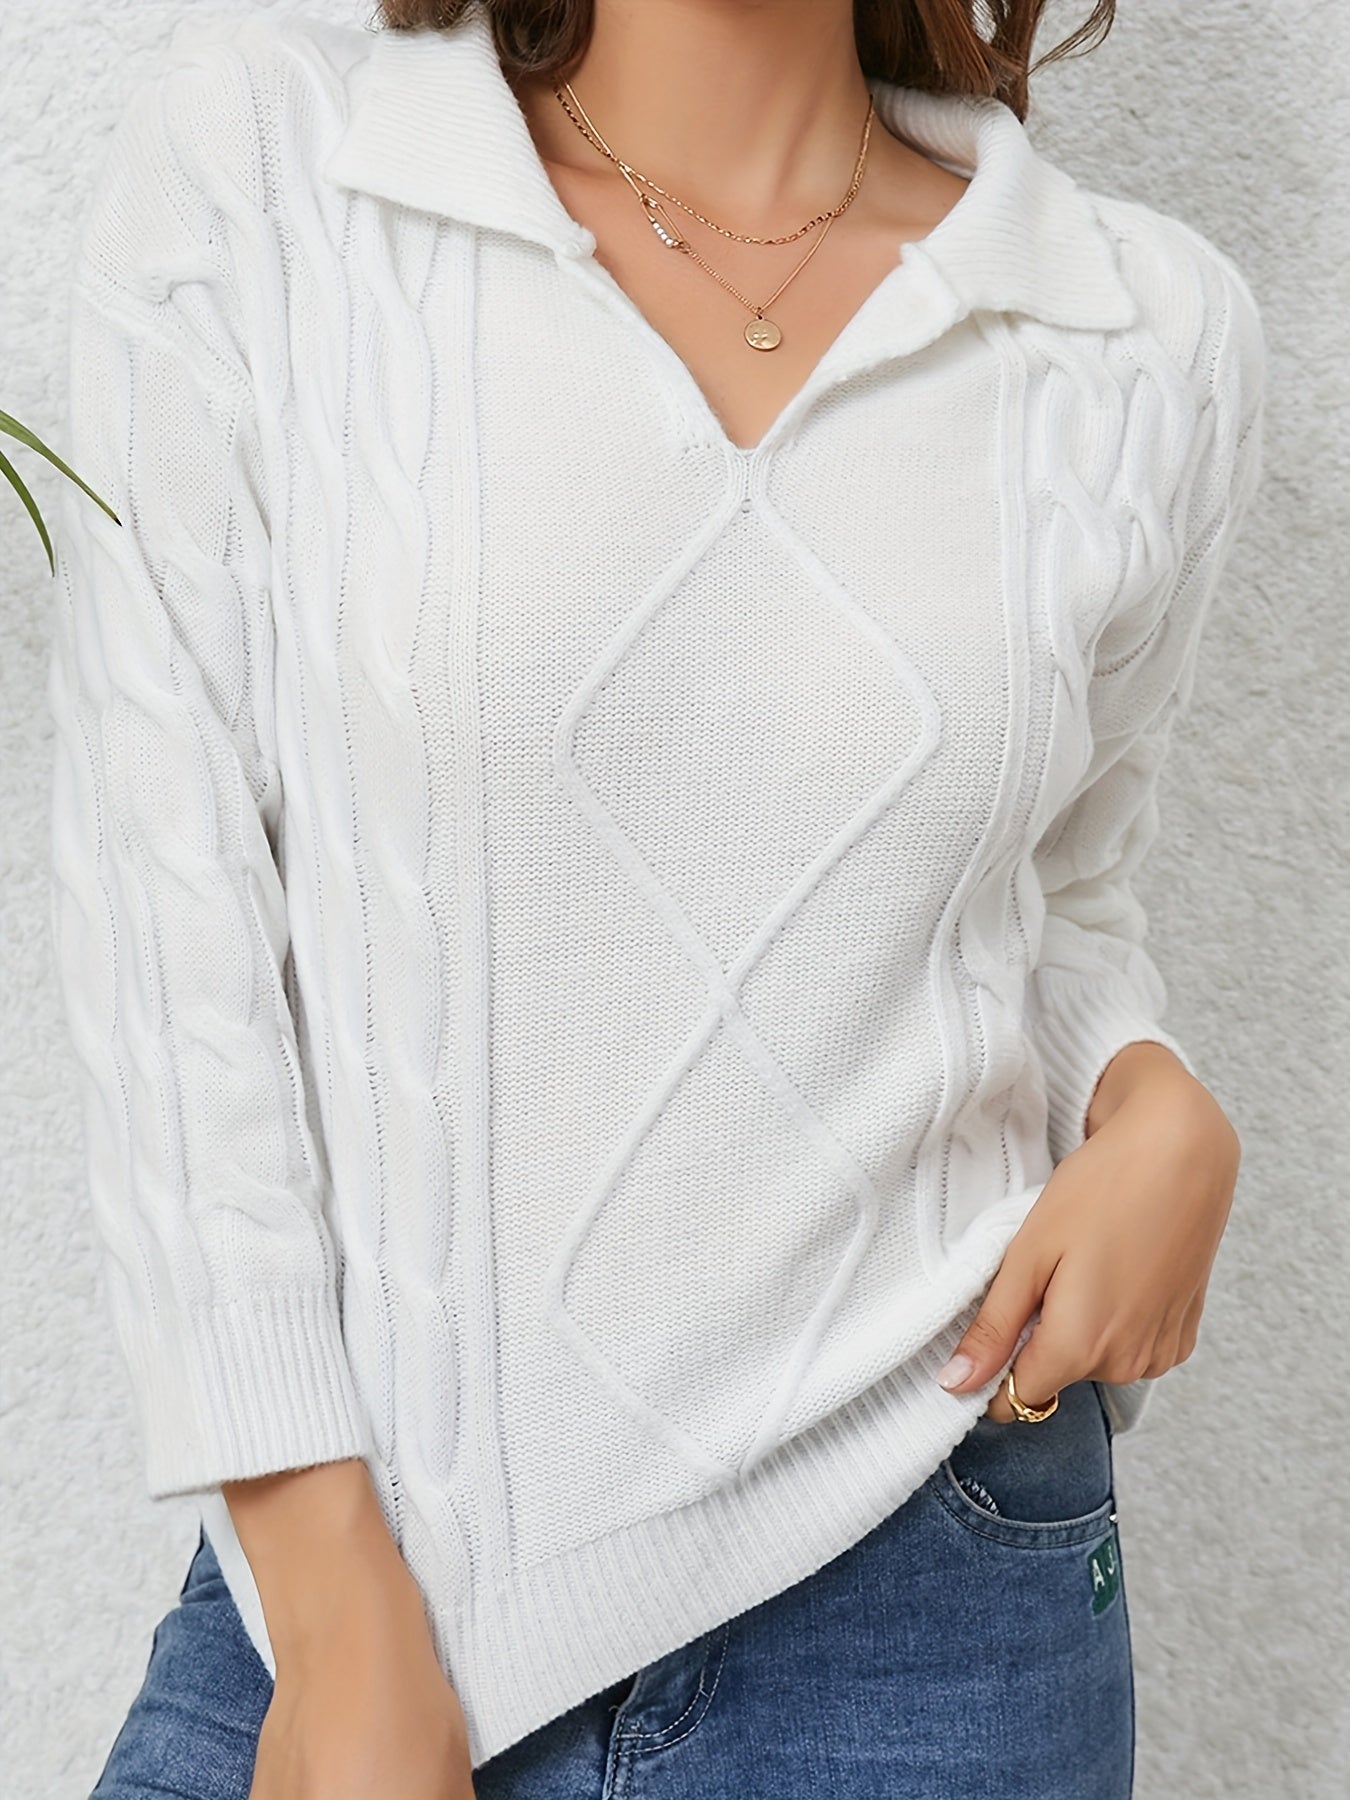 vlovelaw  Solid Cable Knit Sweater, Casual V Neck 3/4 Sleeve Sweater, Women's Clothing